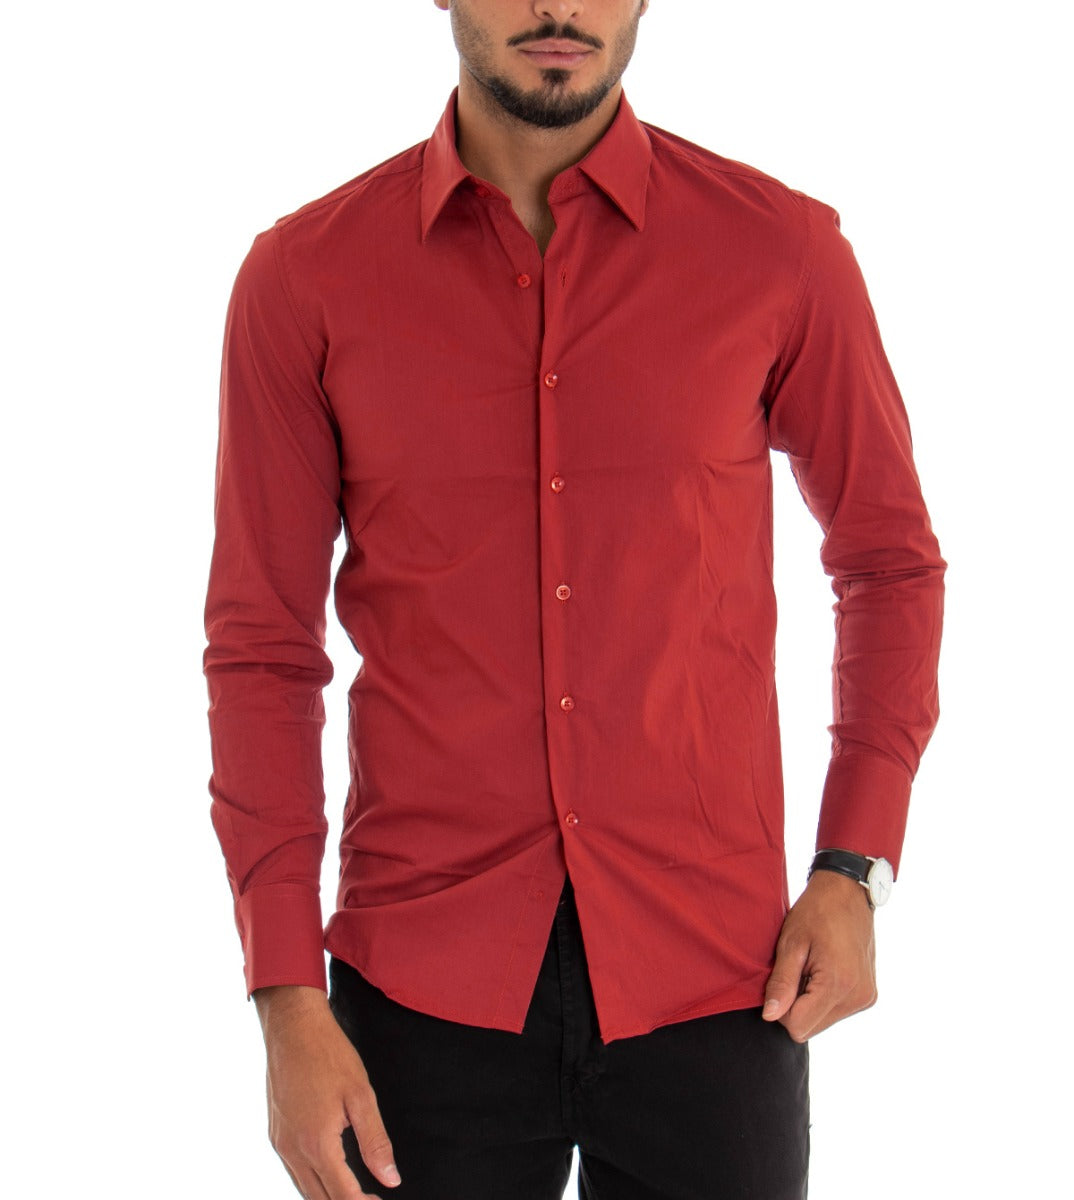 Men's Shirt With Collar Long Sleeve Slim Fit Basic Casual Cotton Red GIOSAL-C2357A